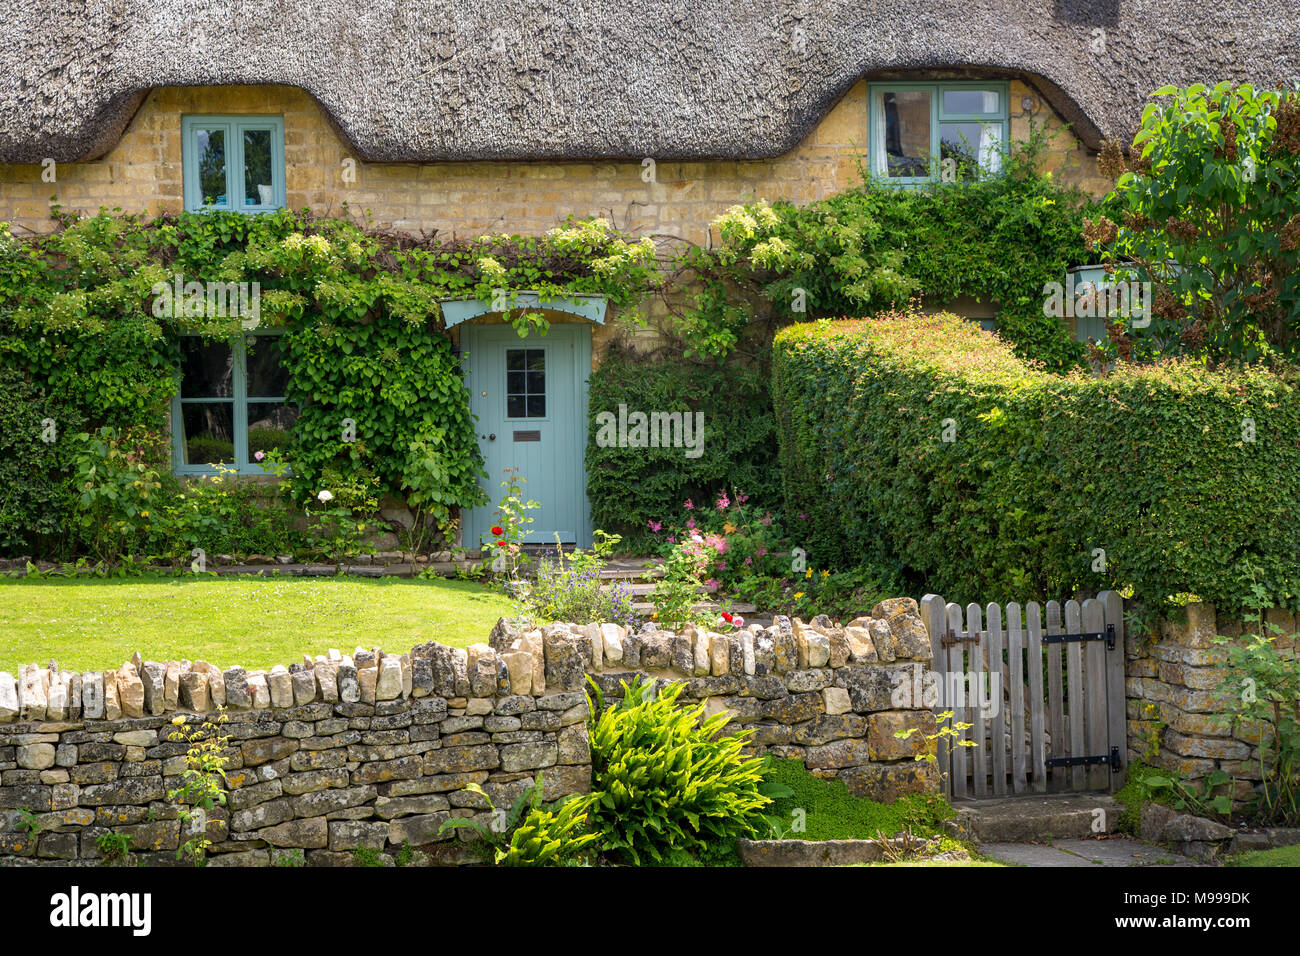 Thatched roof cottage in Chipping-Campden, Gloucestershire, England Stock Photo